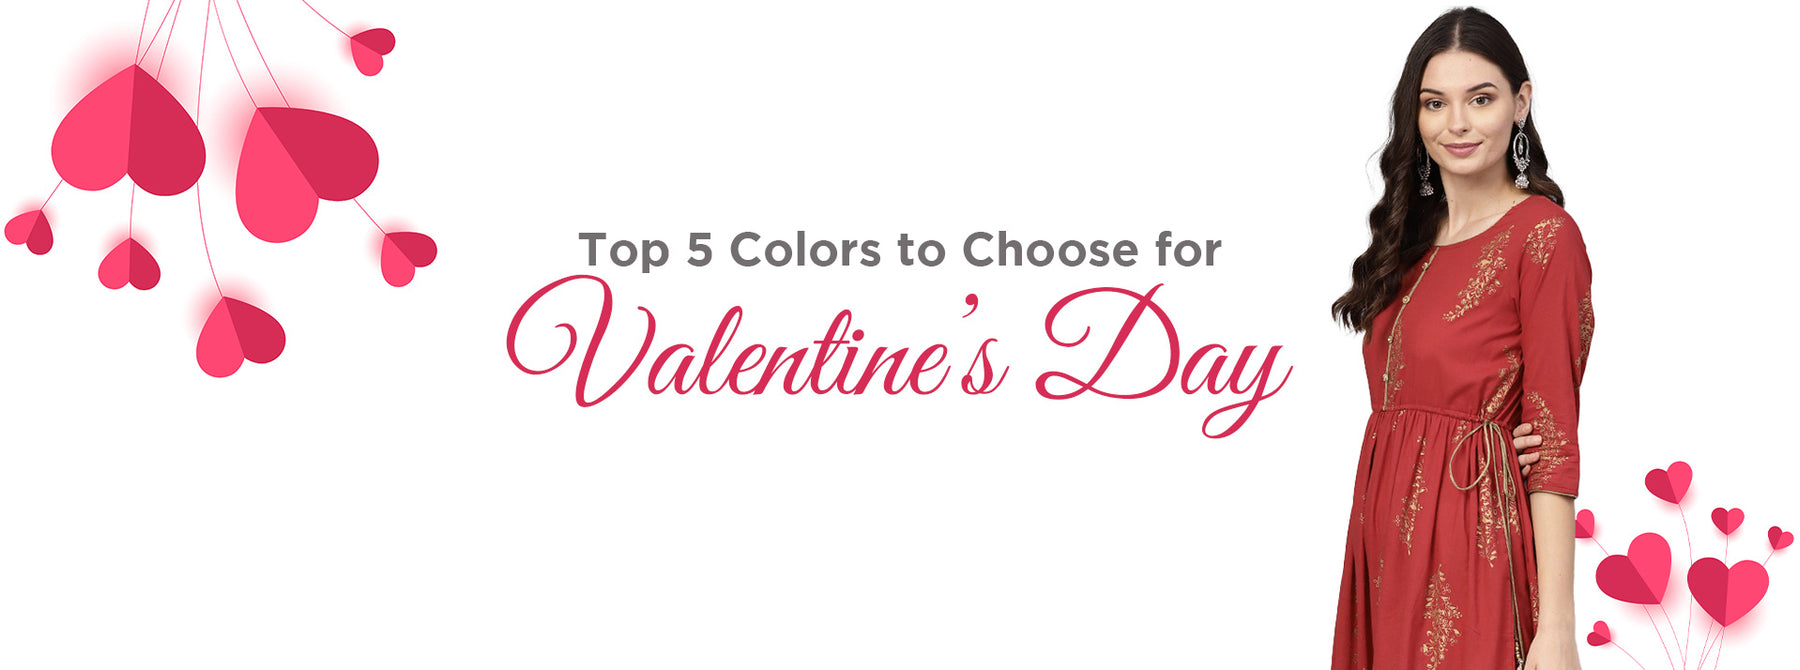 Top 5 Colors to Choose for Valentine’s Day